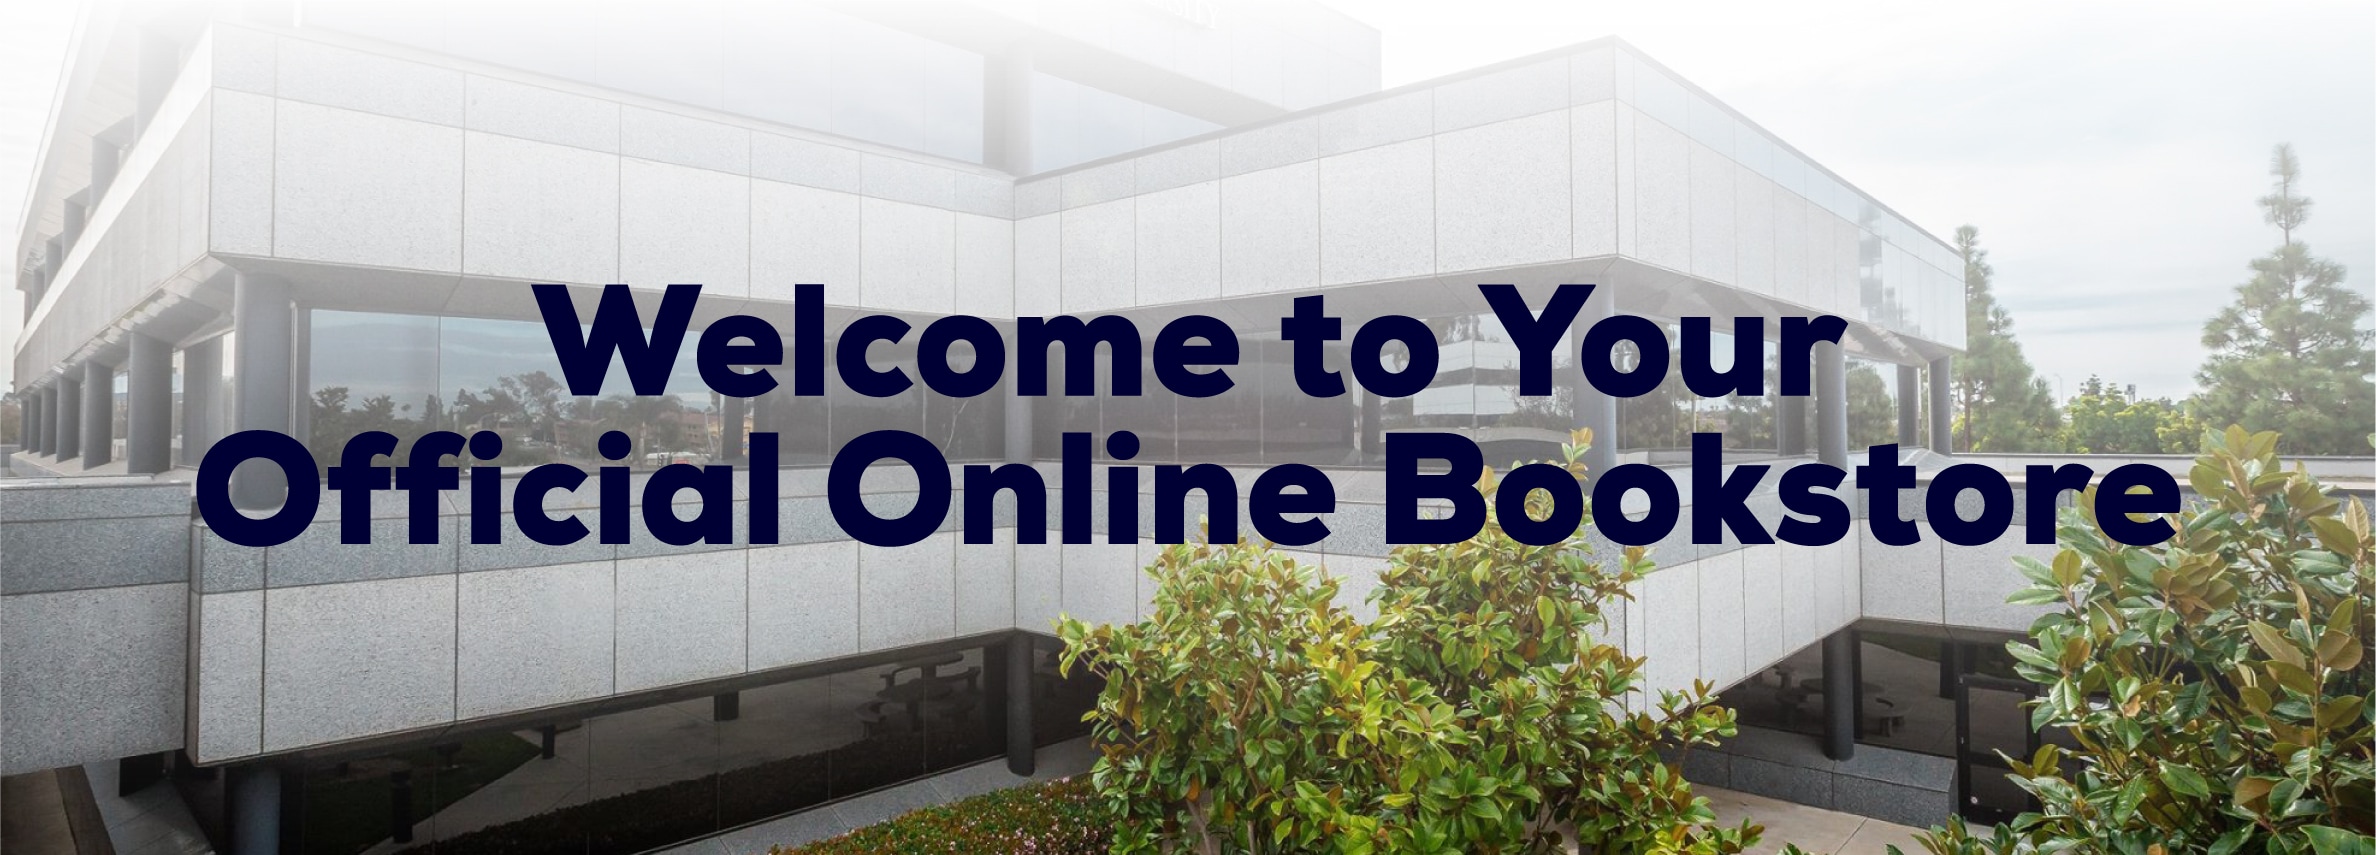 Welcome to Your Official Online